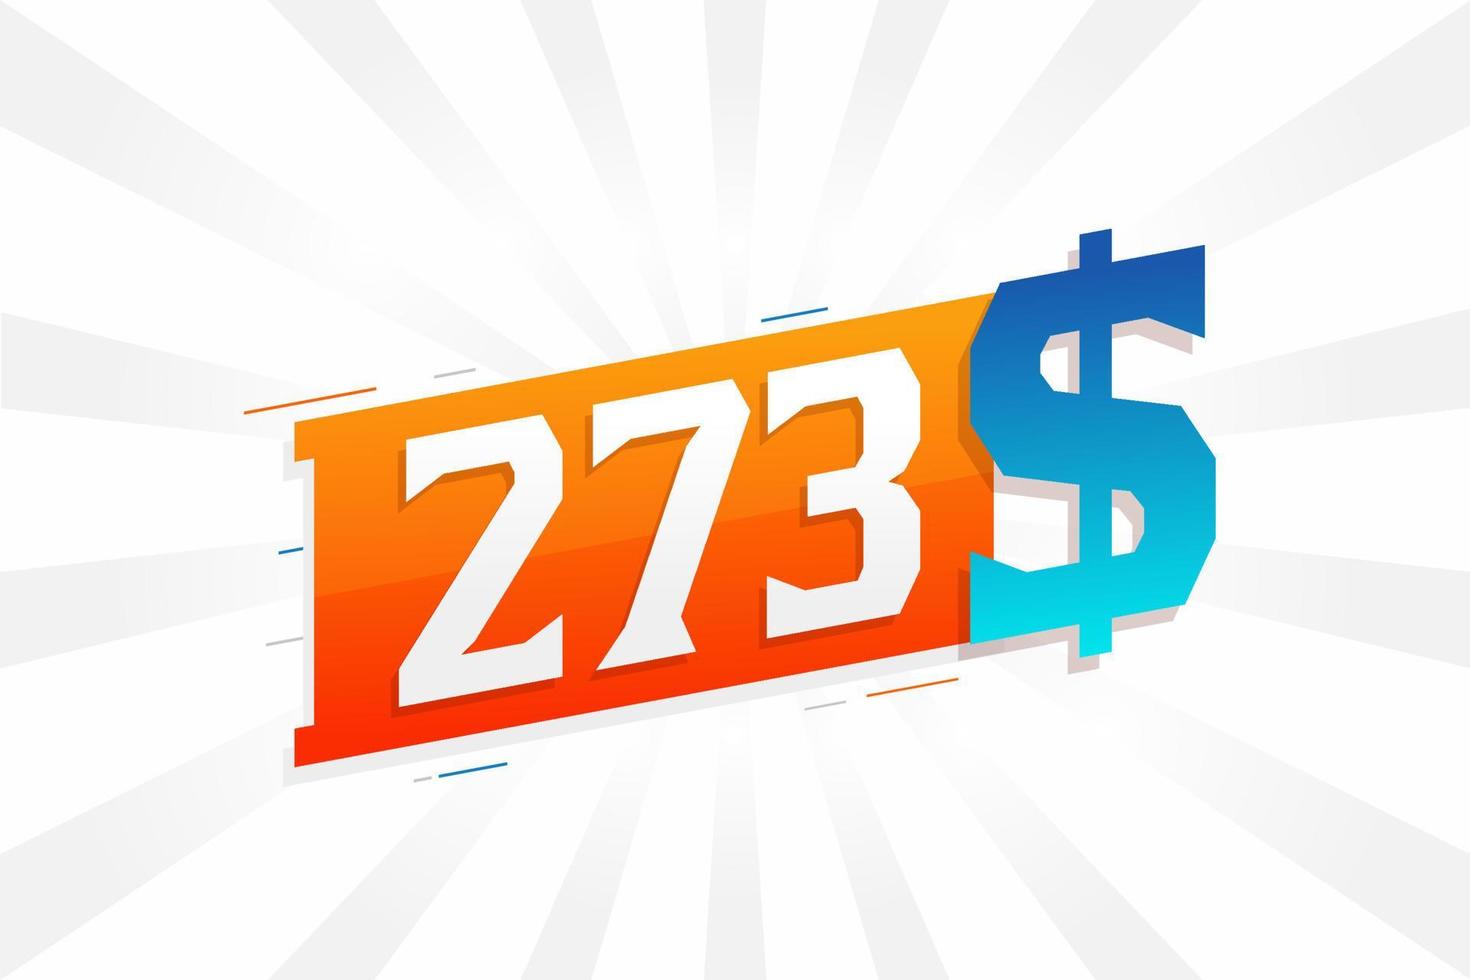 273 Dollar currency vector text symbol. 273 USD United States Dollar American Money stock vector